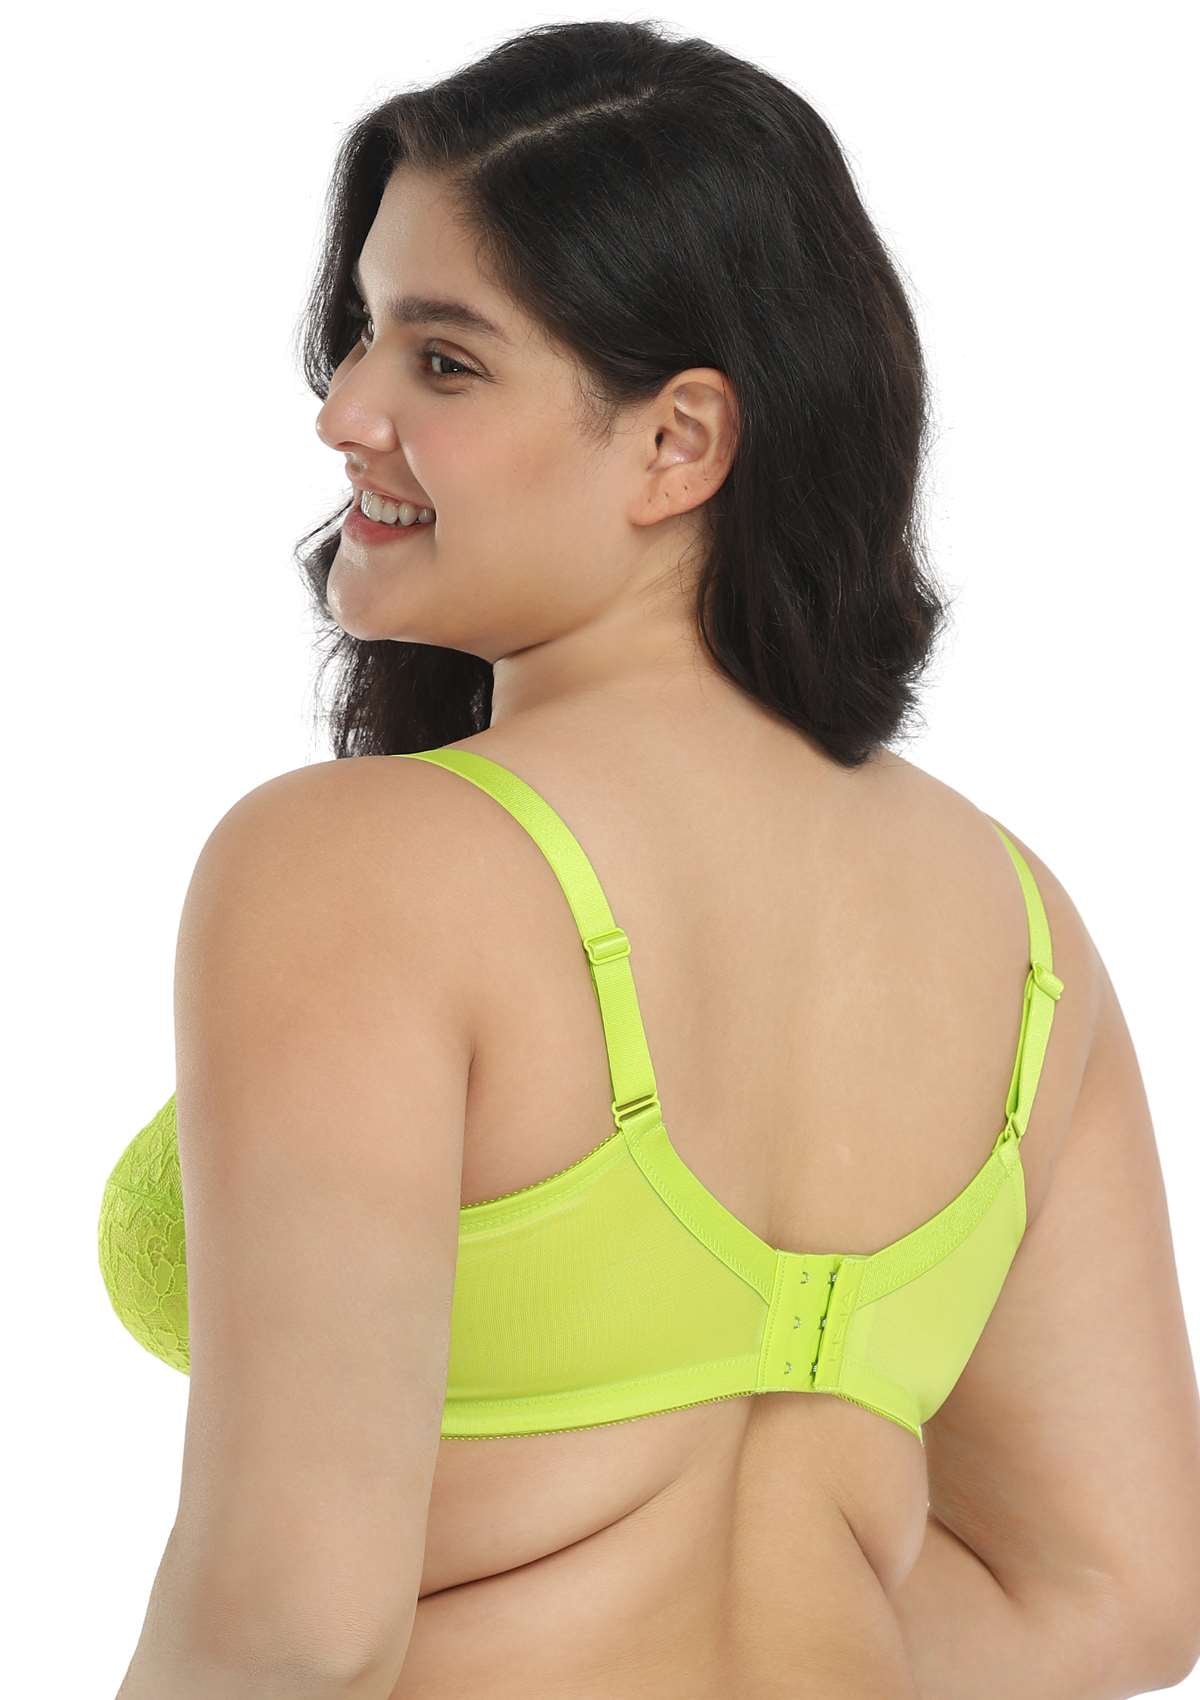 HSIA Enchante Full Cup Minimizing Bra: Supportive Unlined Lace Bra - Lime Green / 34 / C